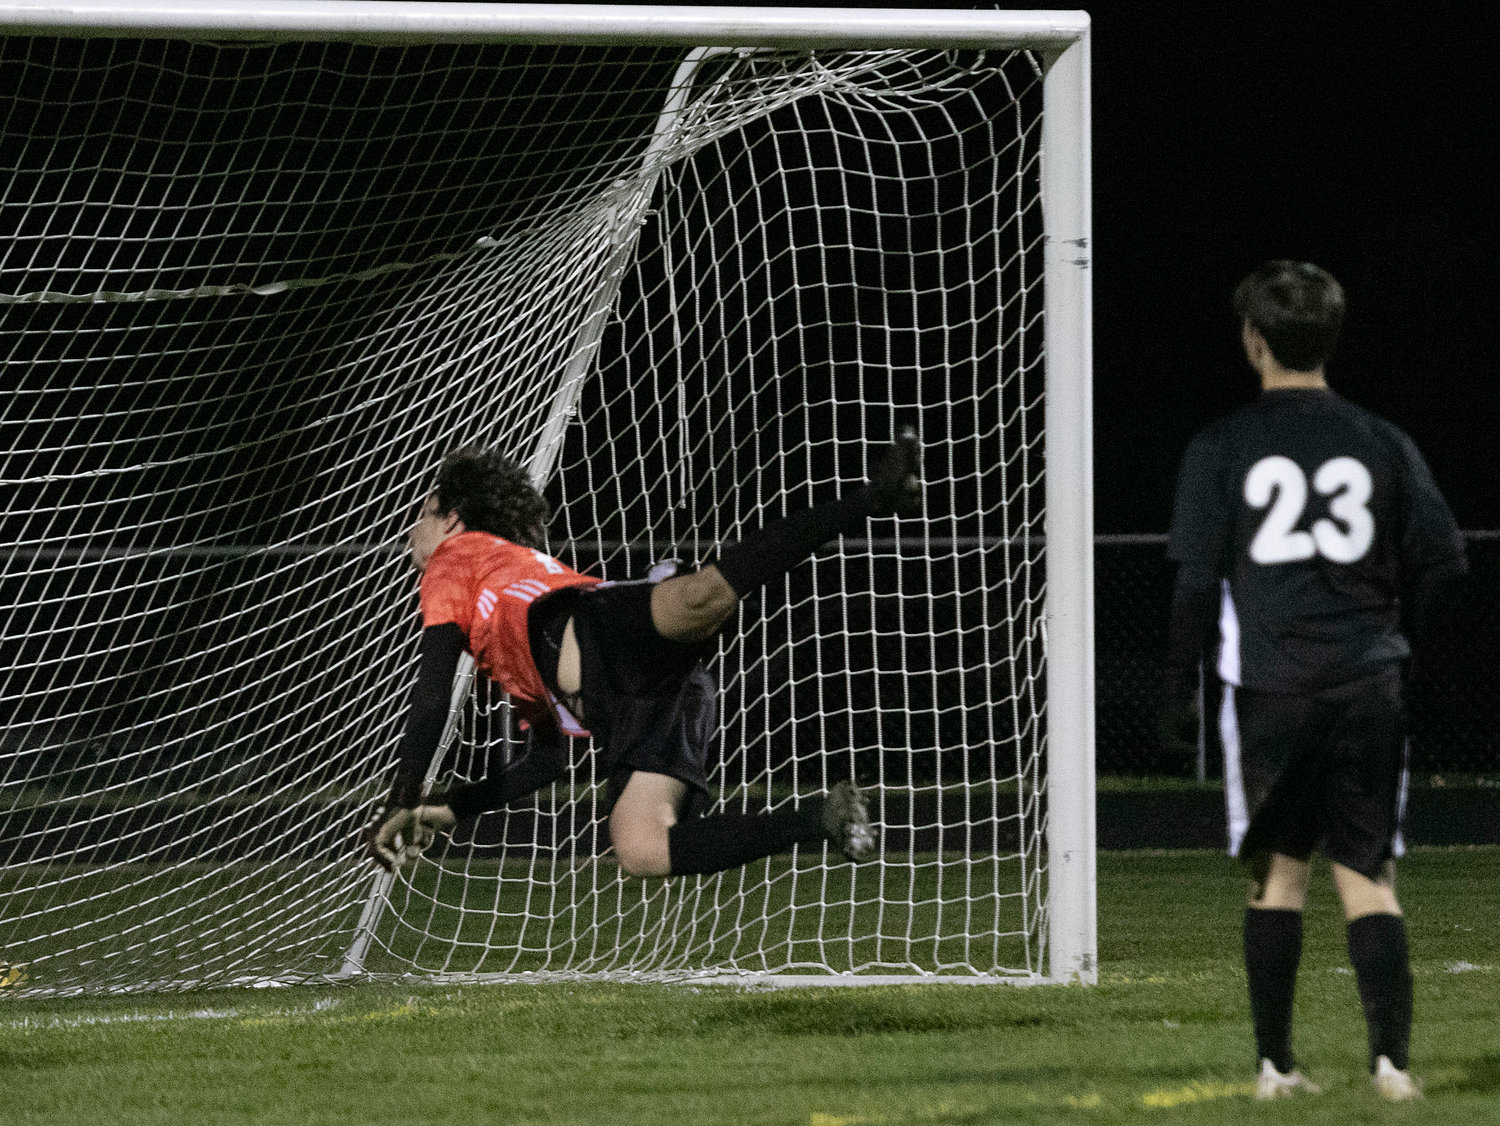 Terceiro falls back after punching the ball over the net for a save in the second half.